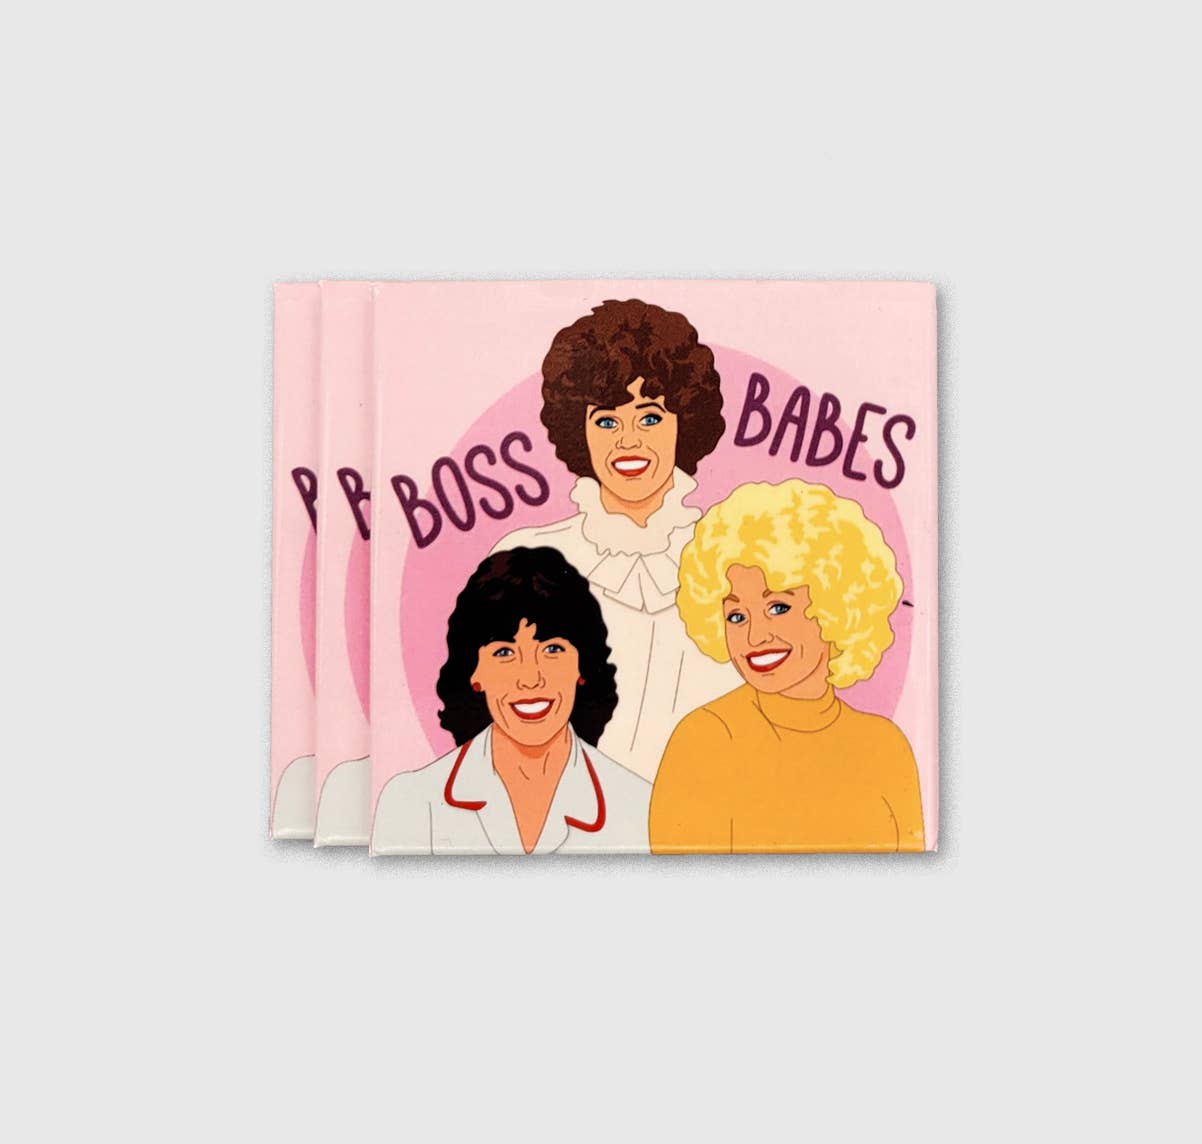 9 to 5 Boss Babes Magnet